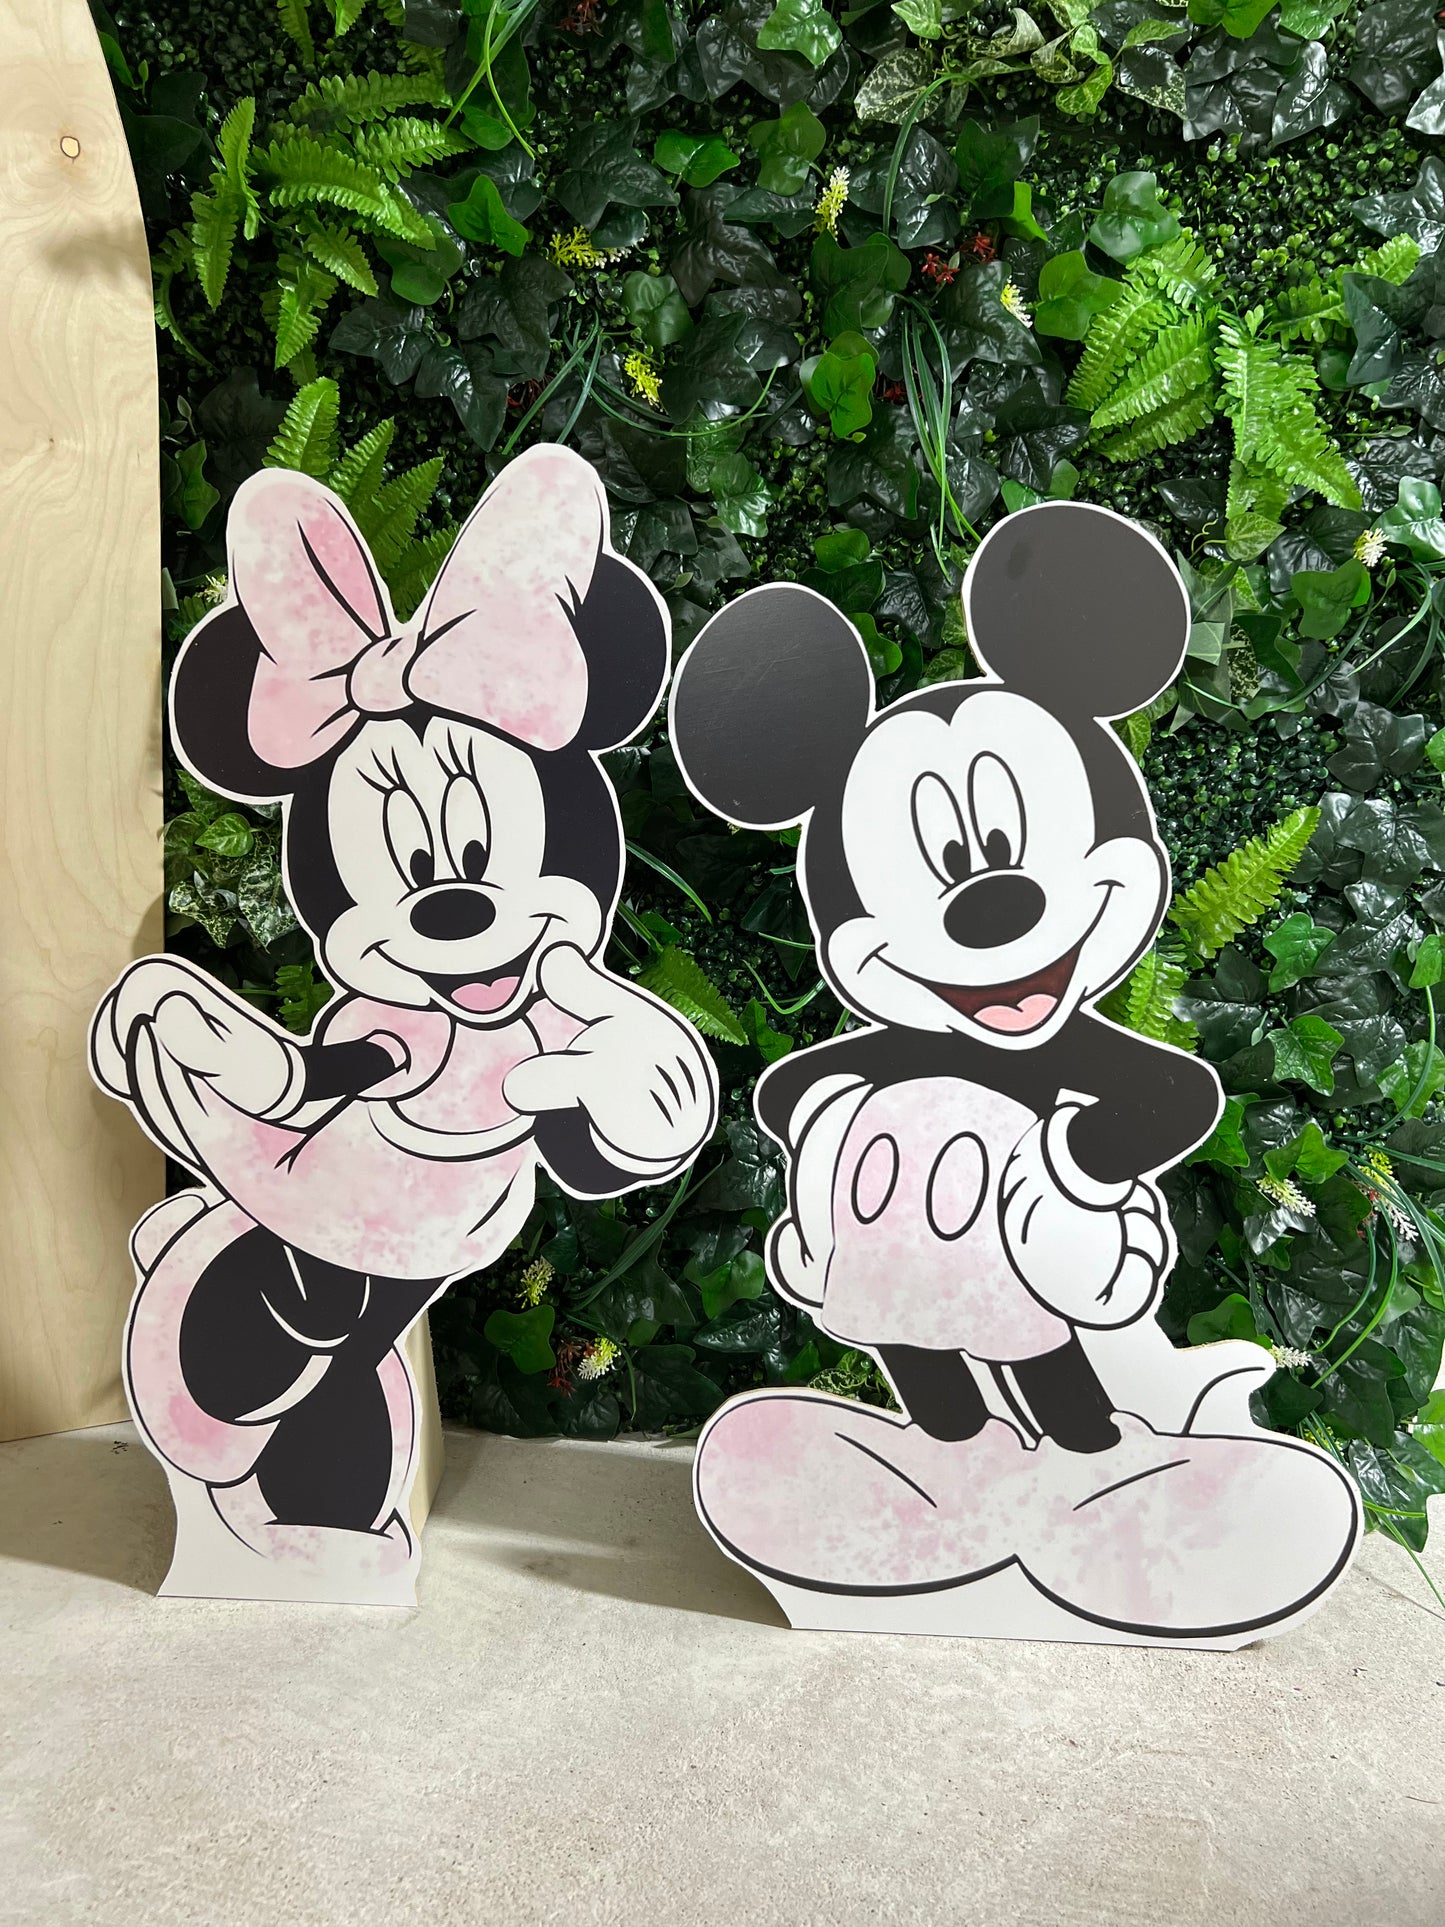 Character Cut Outs, wooden props, standees